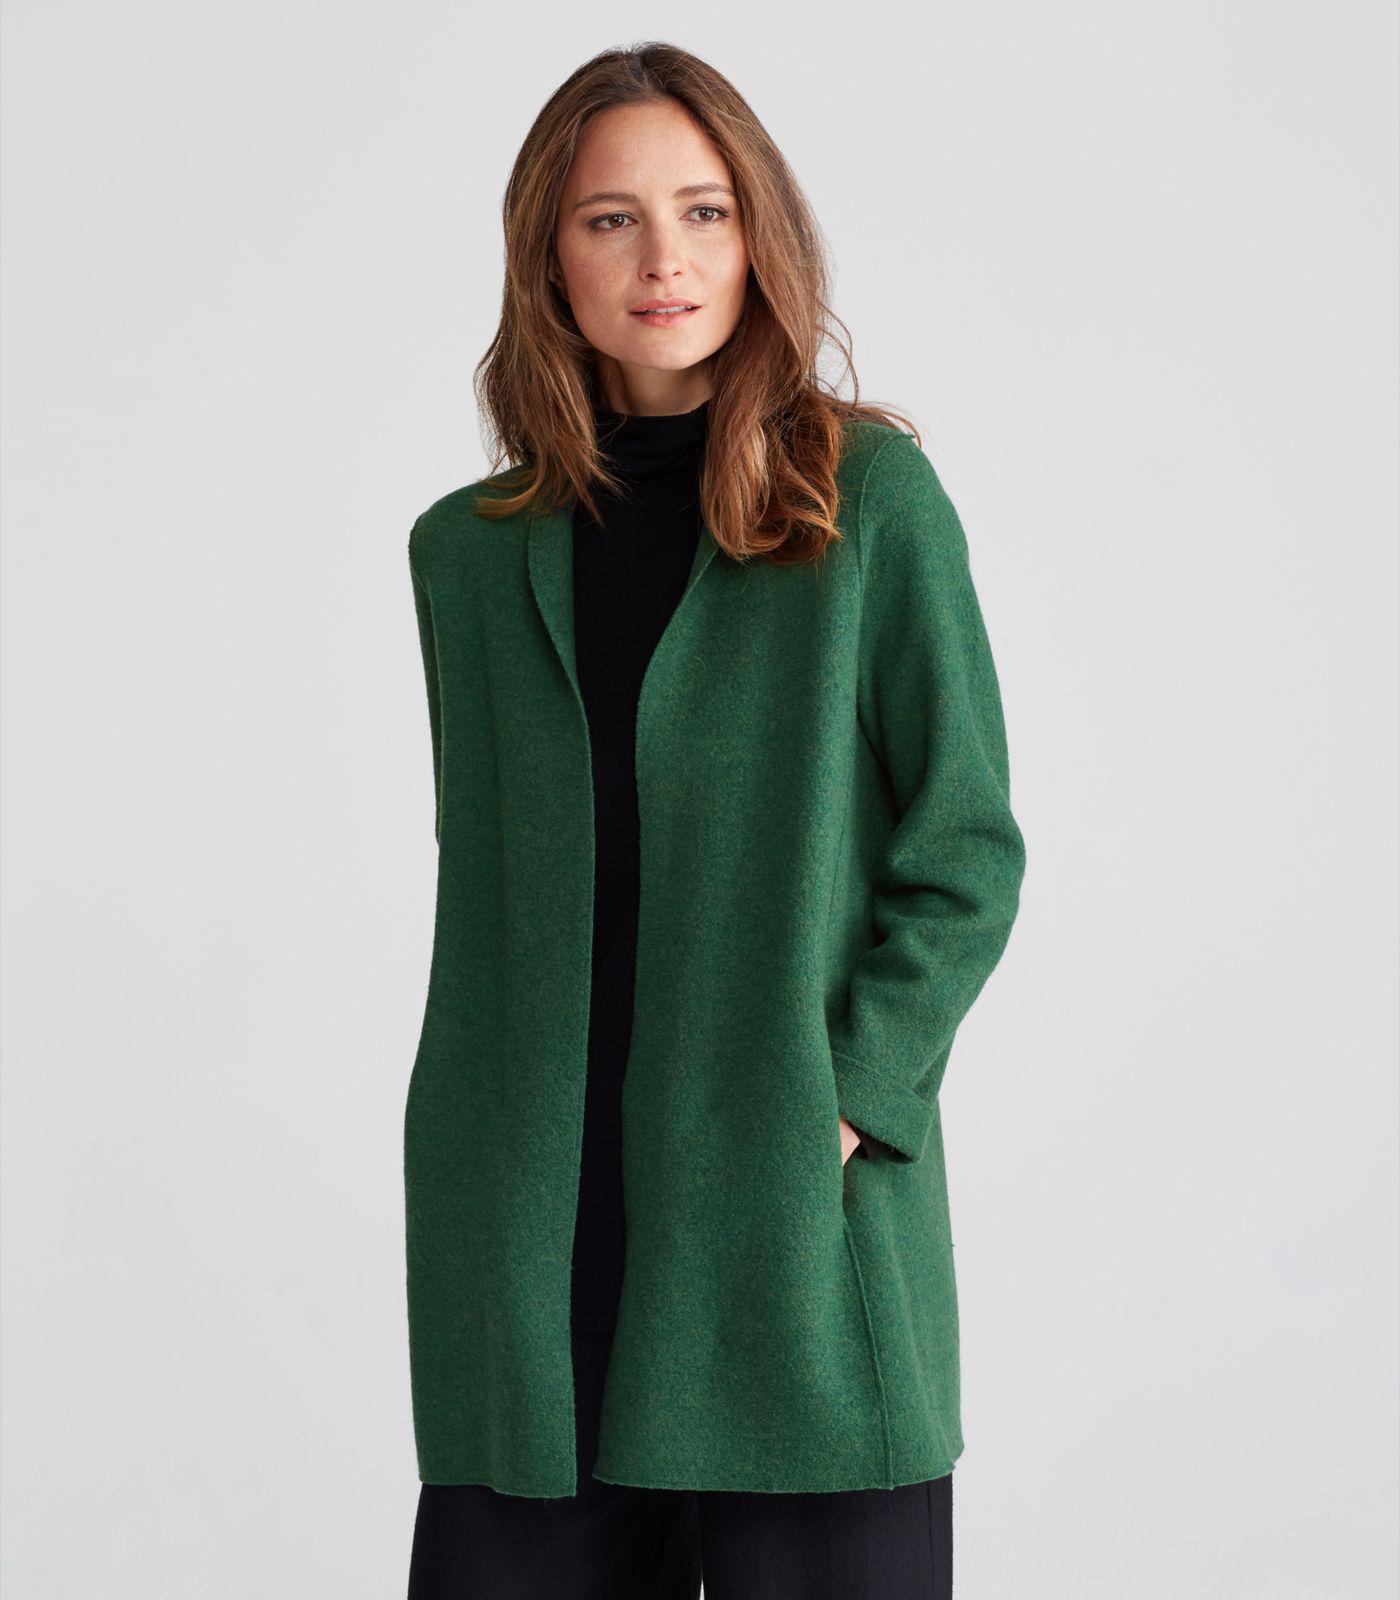 Eileen Fisher Boiled Wool High Collar Jacket in Green - Lyst